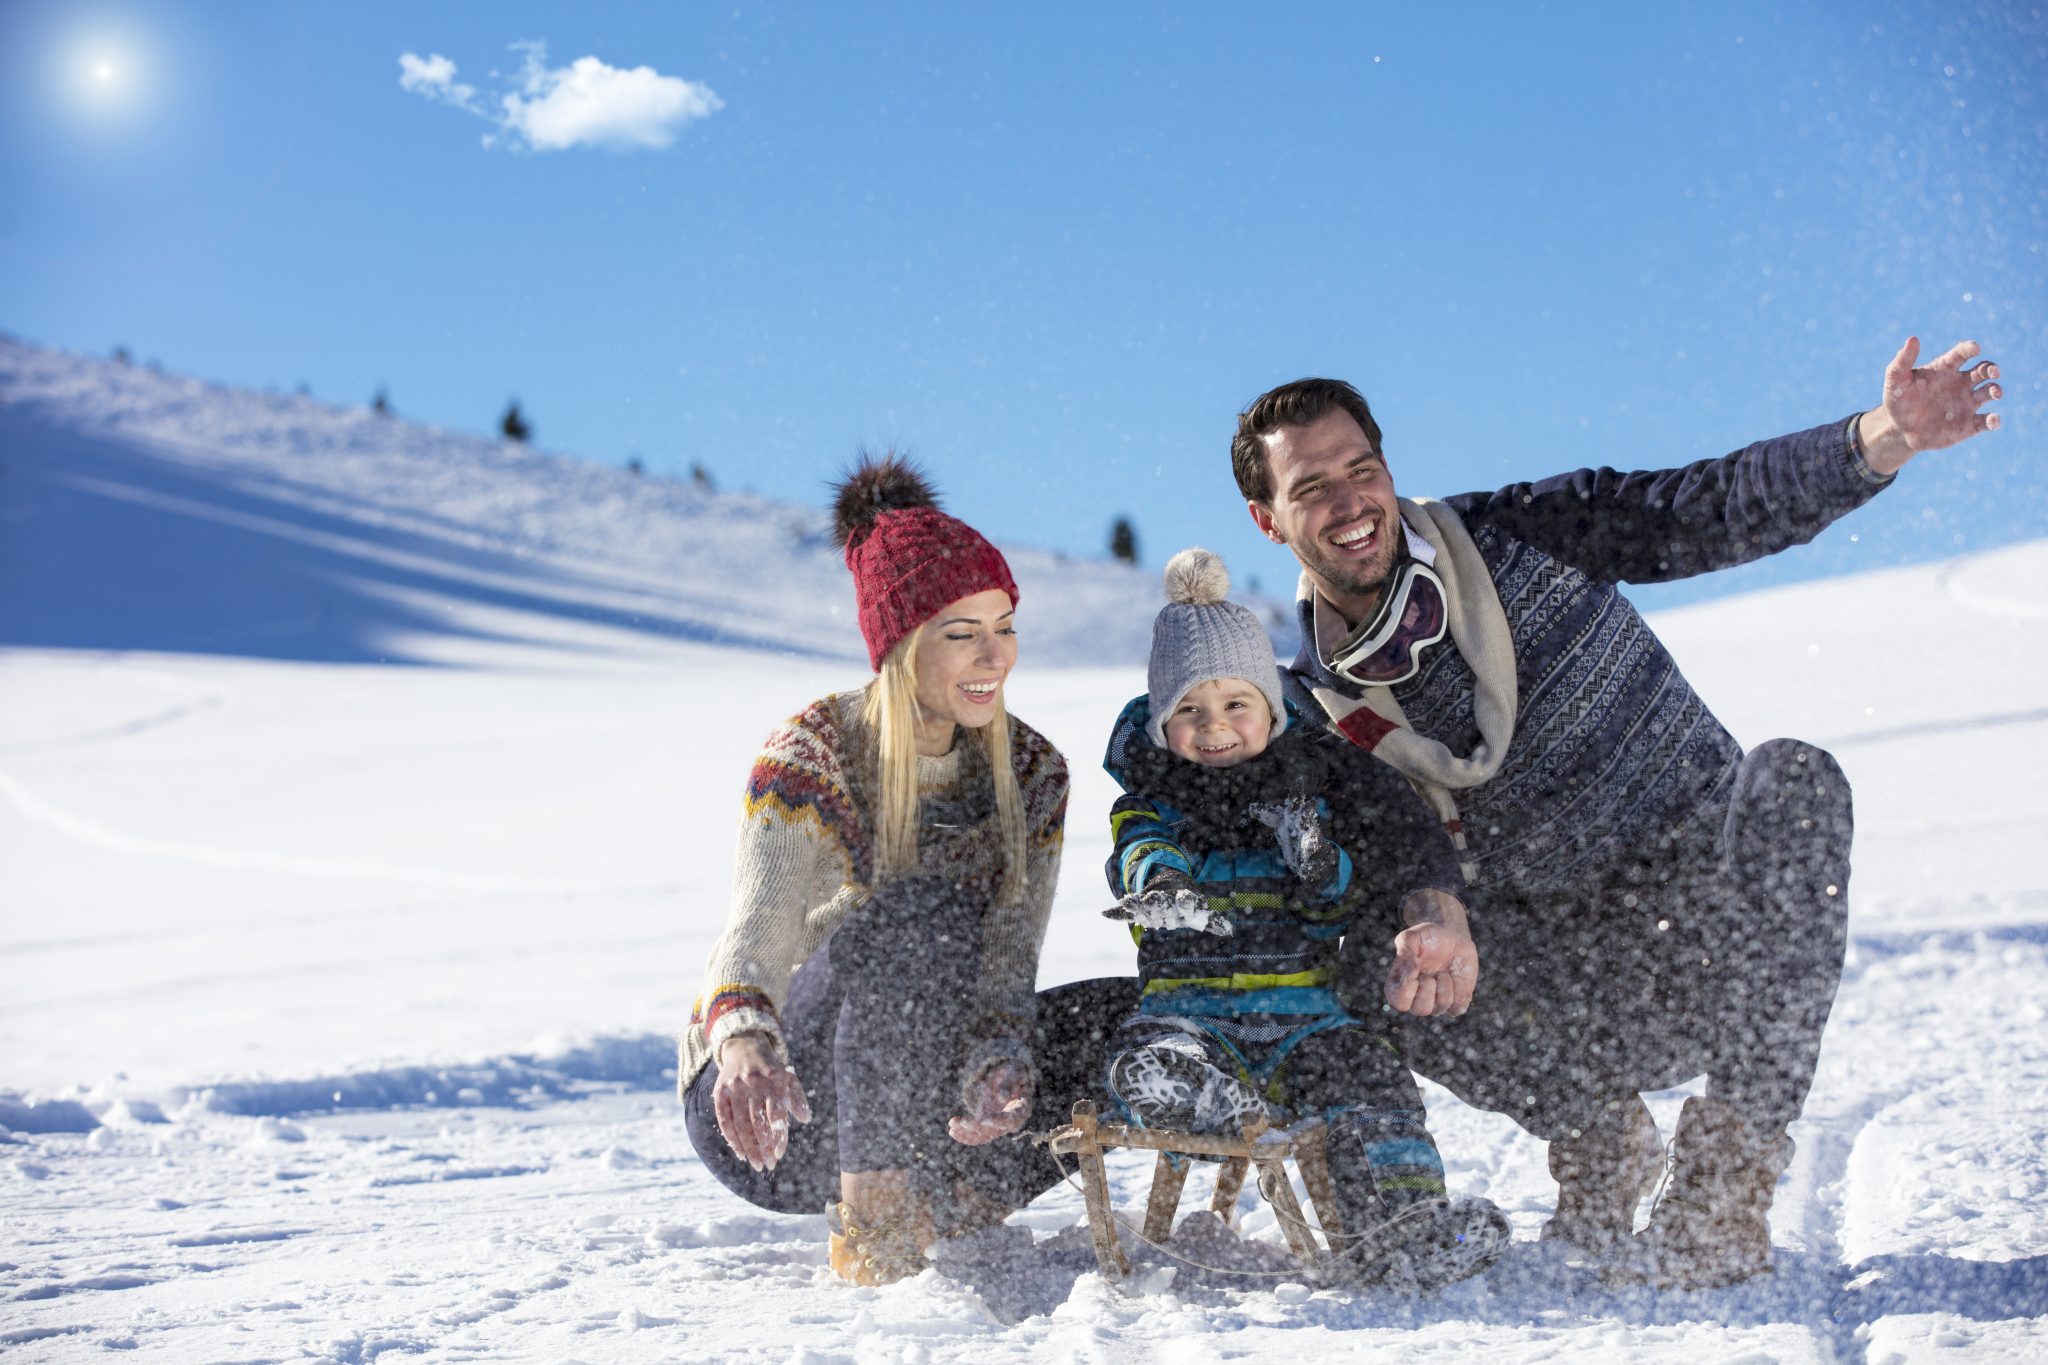 Planning a family trip to Lapland? One Irish blogger has some brilliant money-saving tips